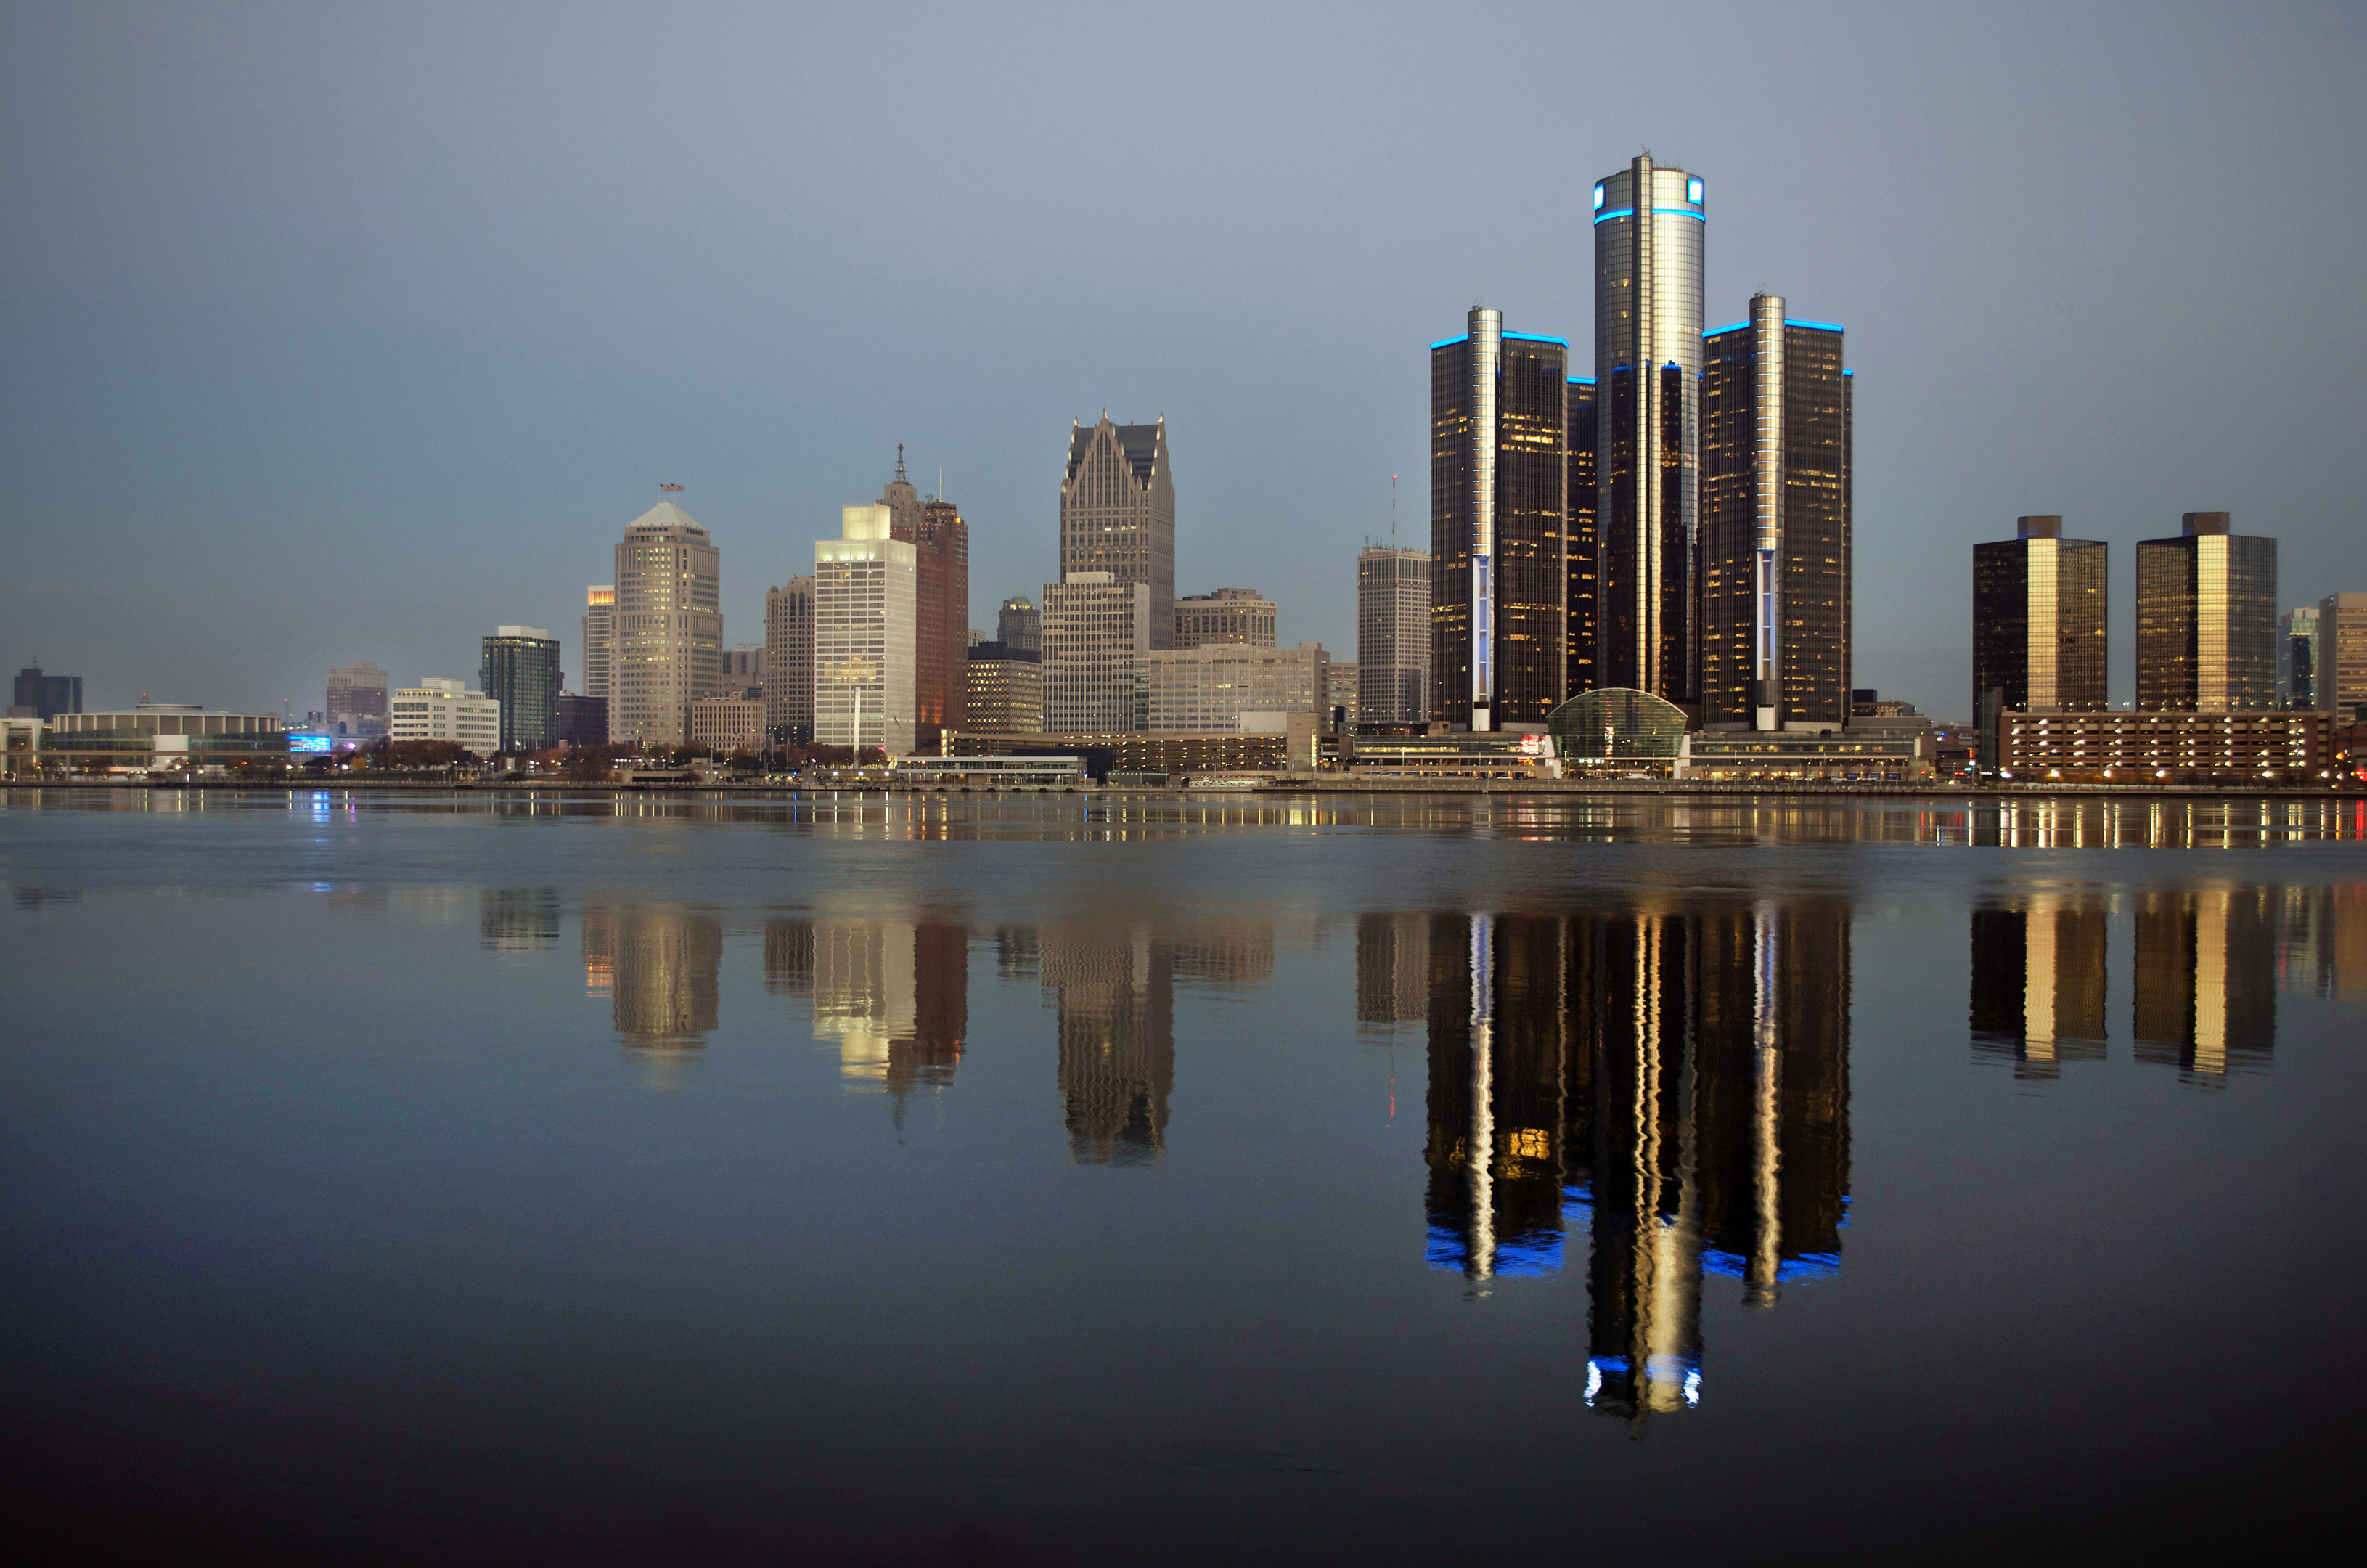 Detroit, Michigan (Getty Images/iStock)